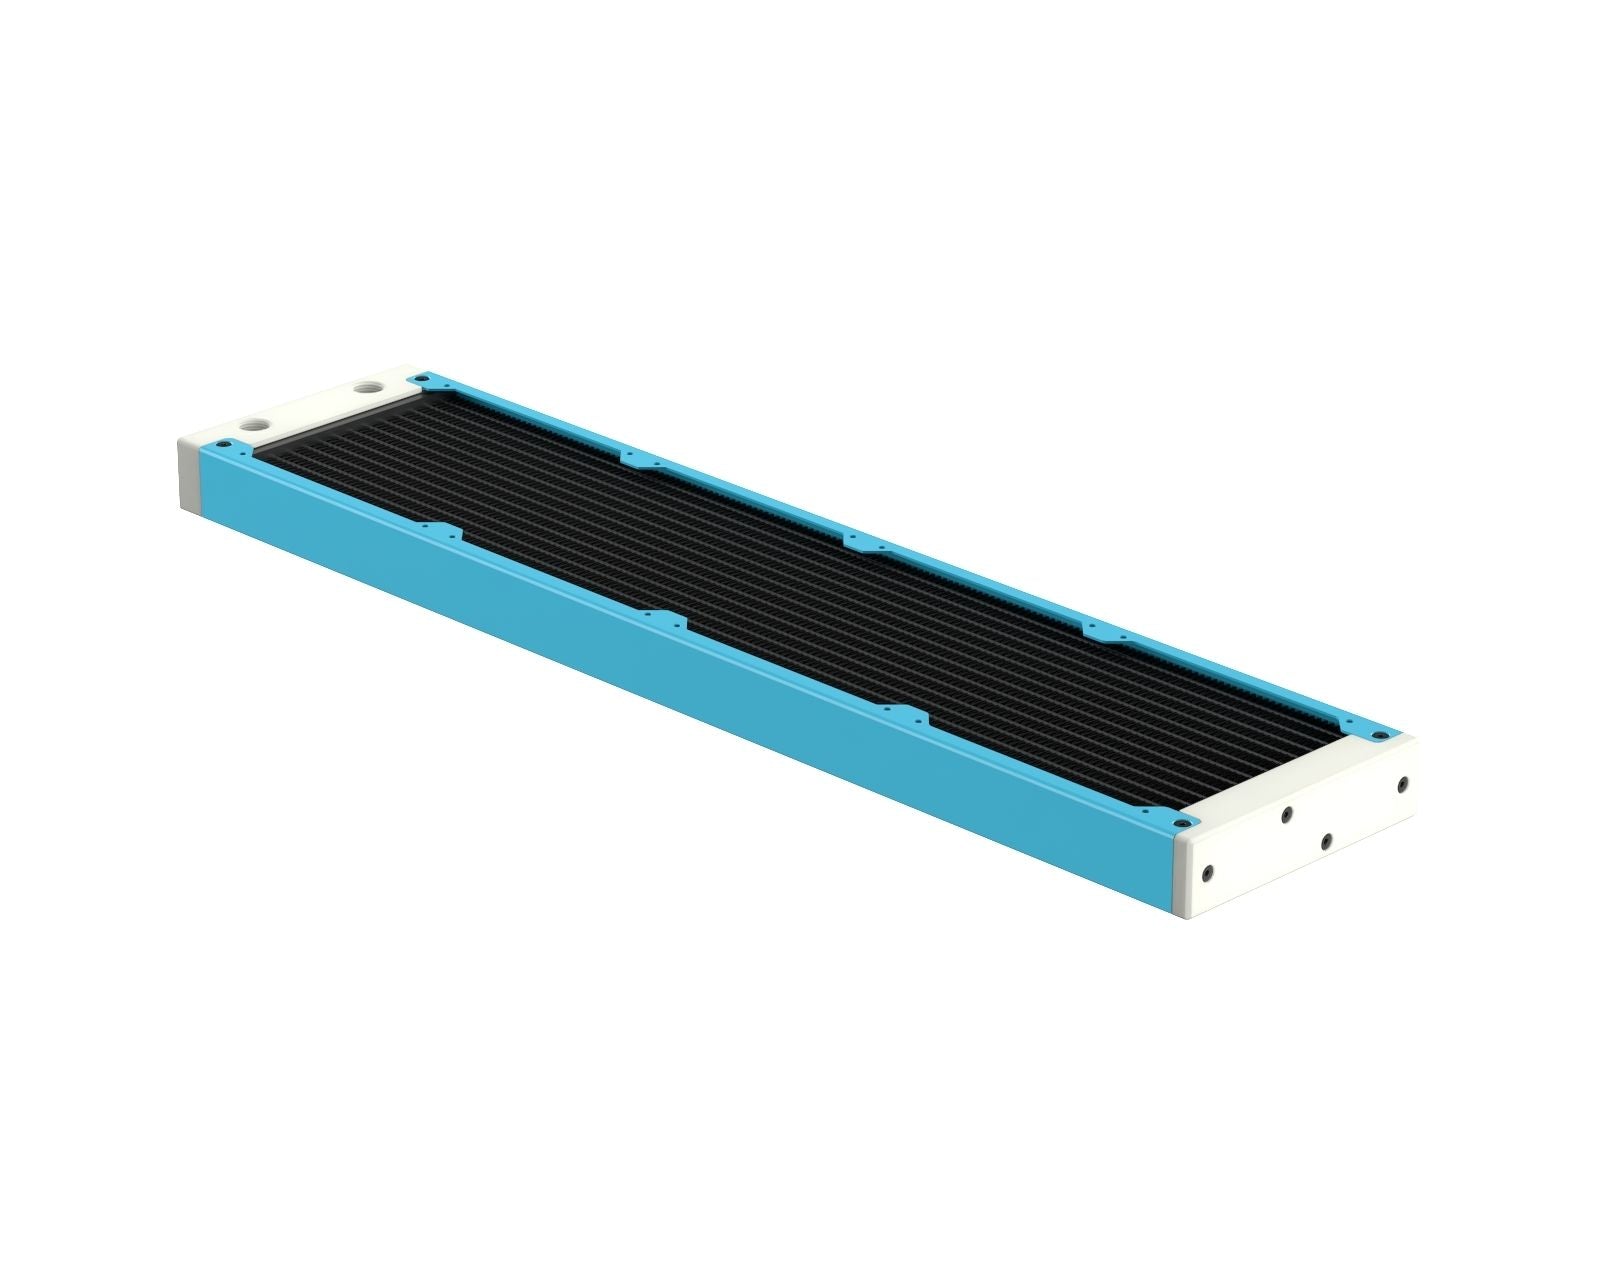 PrimoChill 480SL (30mm) EXIMO Modular Radiator, White POM, 4x120mm, Quad Fan (R-SL-W48) Available in 20+ Colors, Assembled in USA and Custom Watercooling Loop Ready - Sky Blue